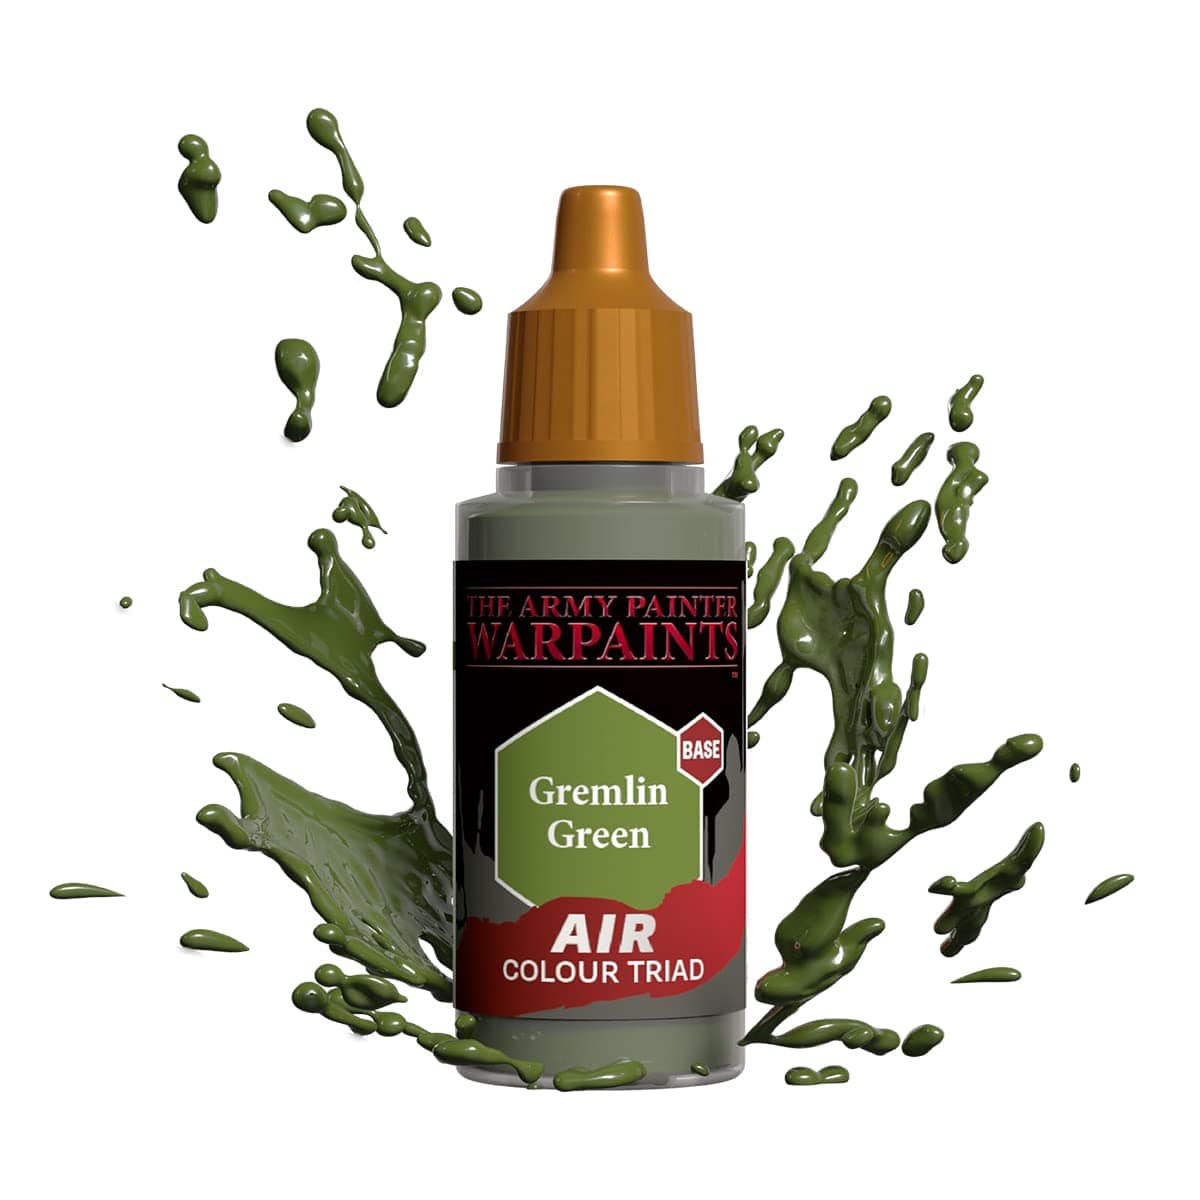 The Army Painter Warpaints Air: Gremlin Green 18ml - Lost City Toys